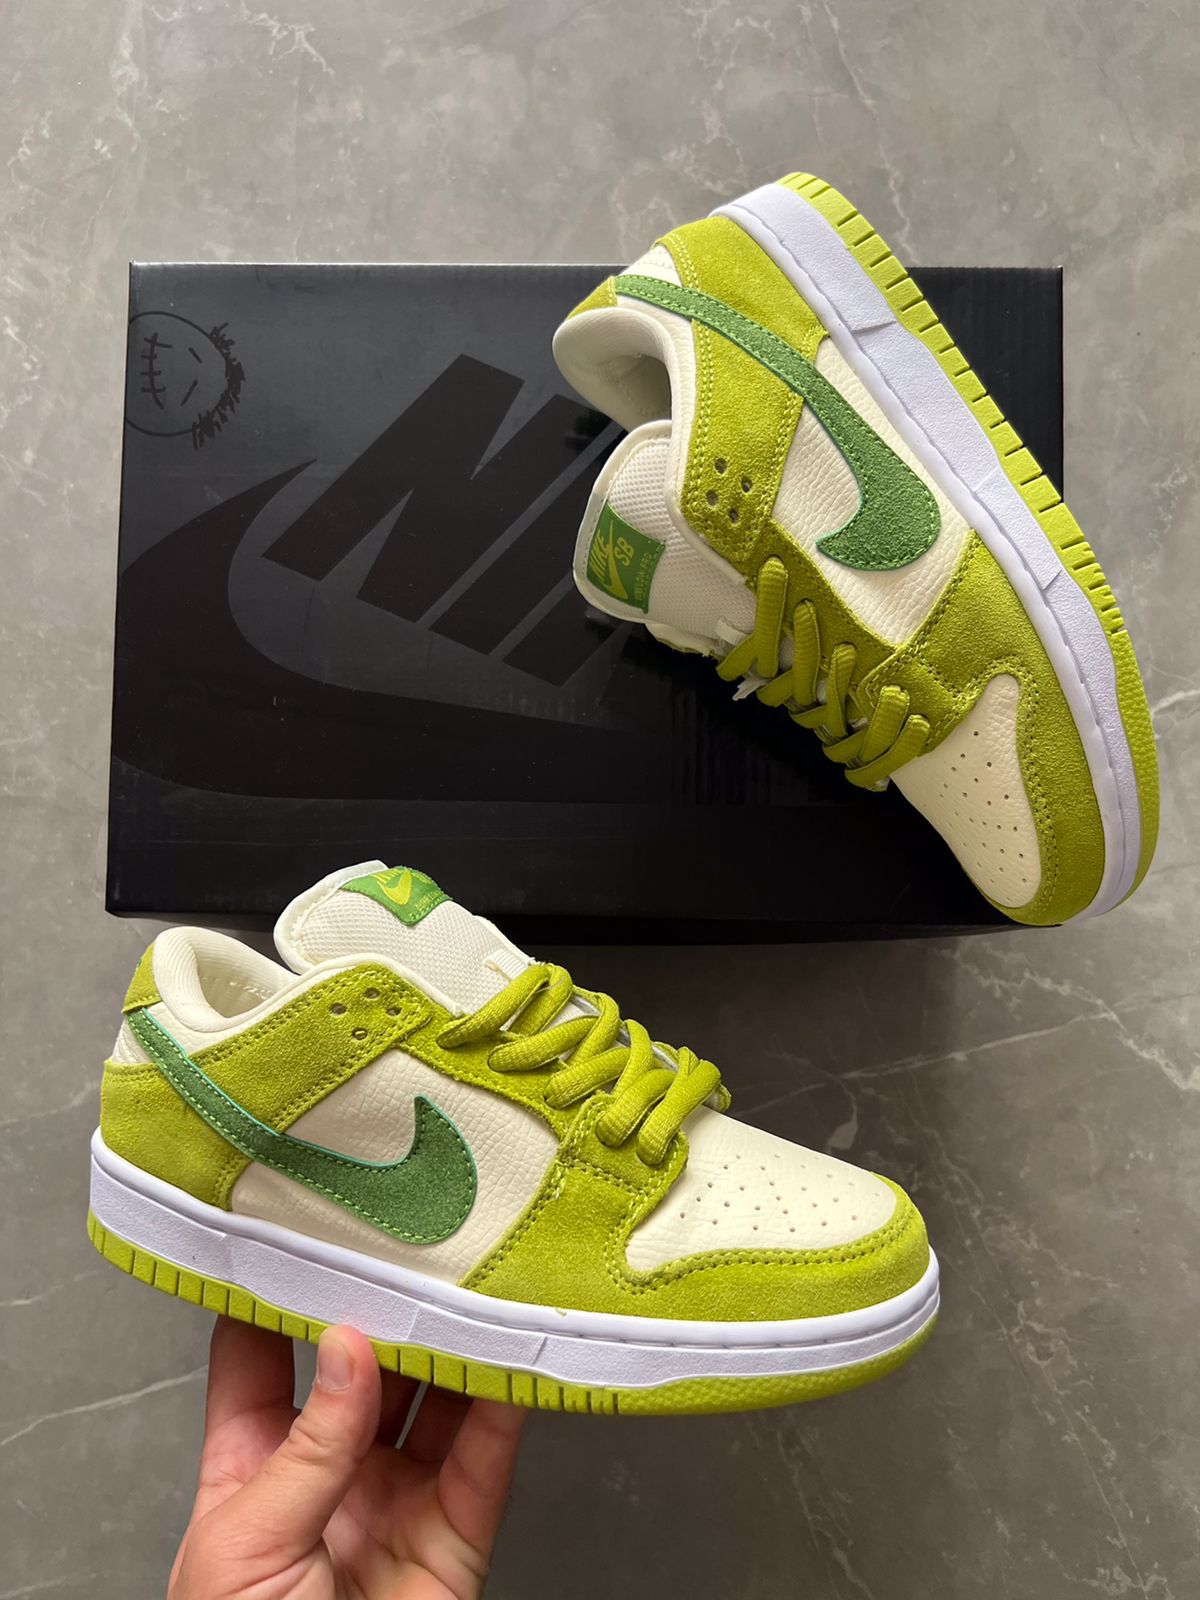 SB Dunk Full Leather For Girls 5 Colors